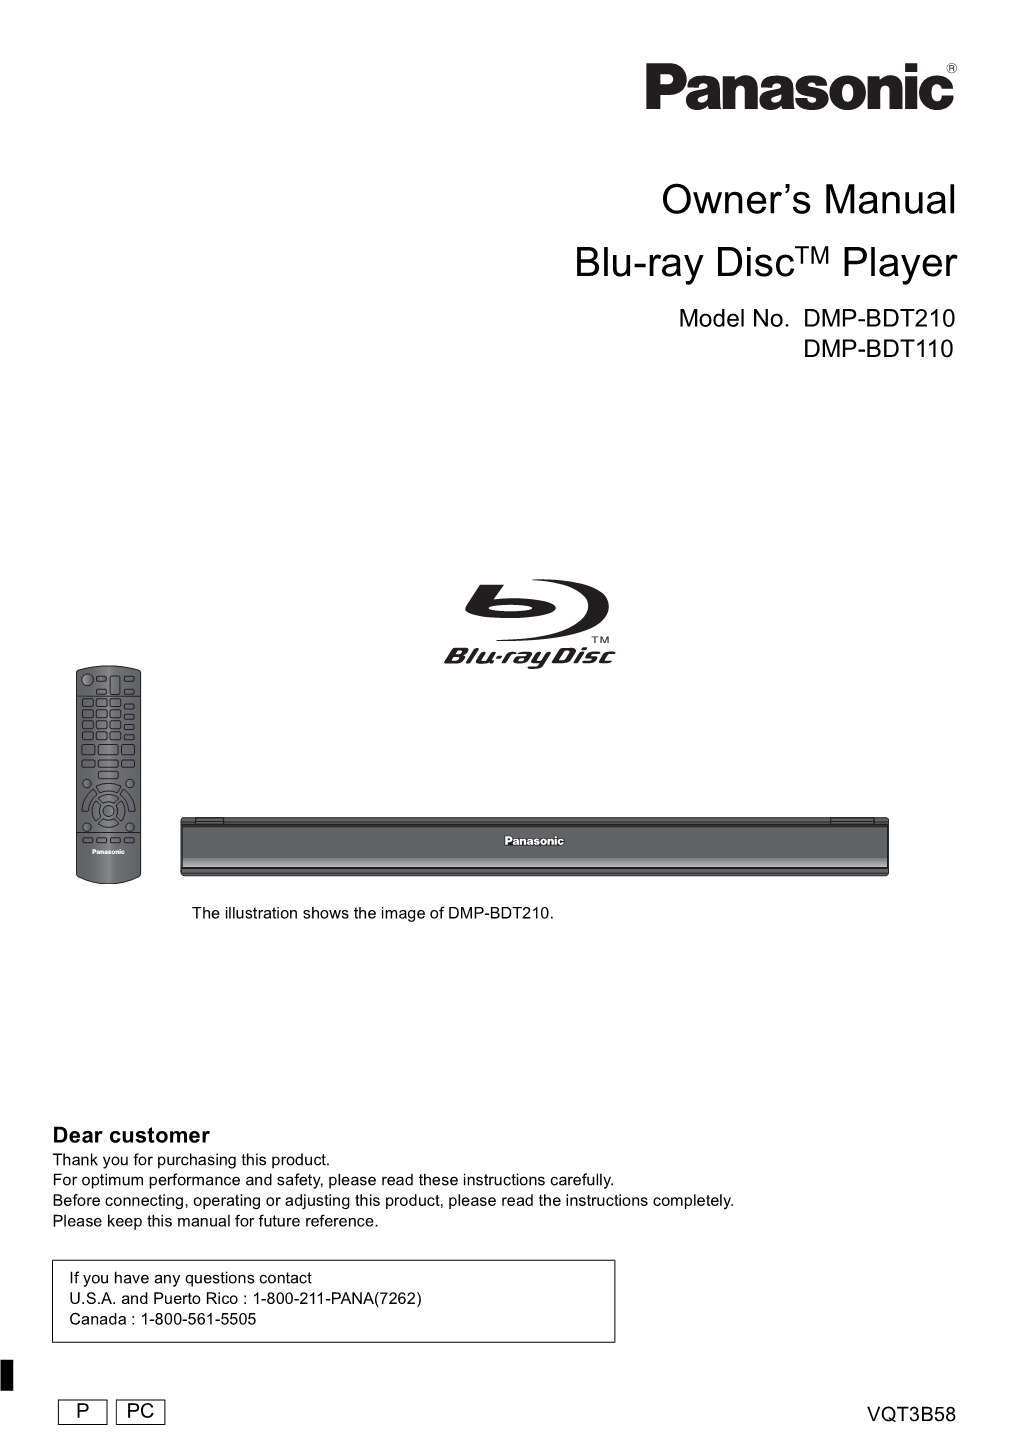 Owner's Manual Blu-Ray Disctm Player